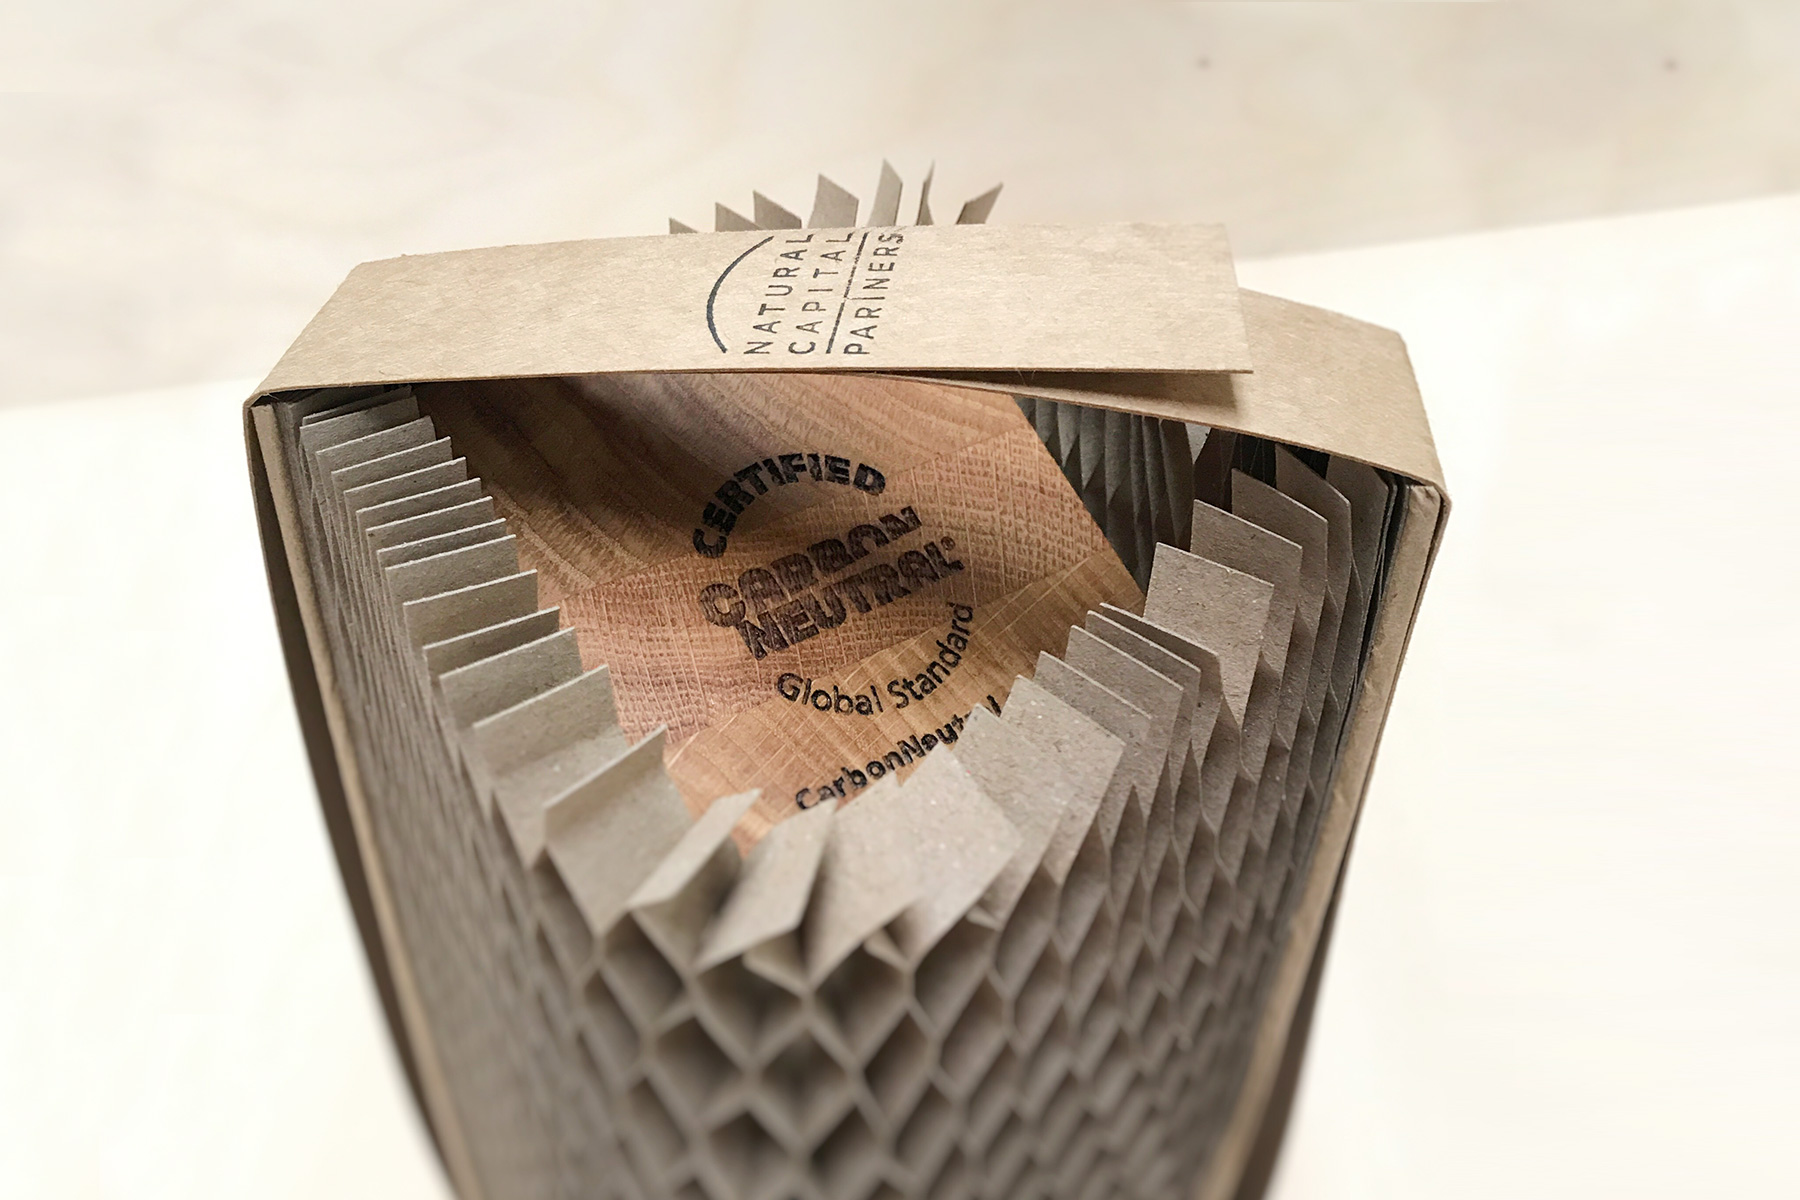 carbonneutral ecotrophie packaged in flexihex sustainable packaging